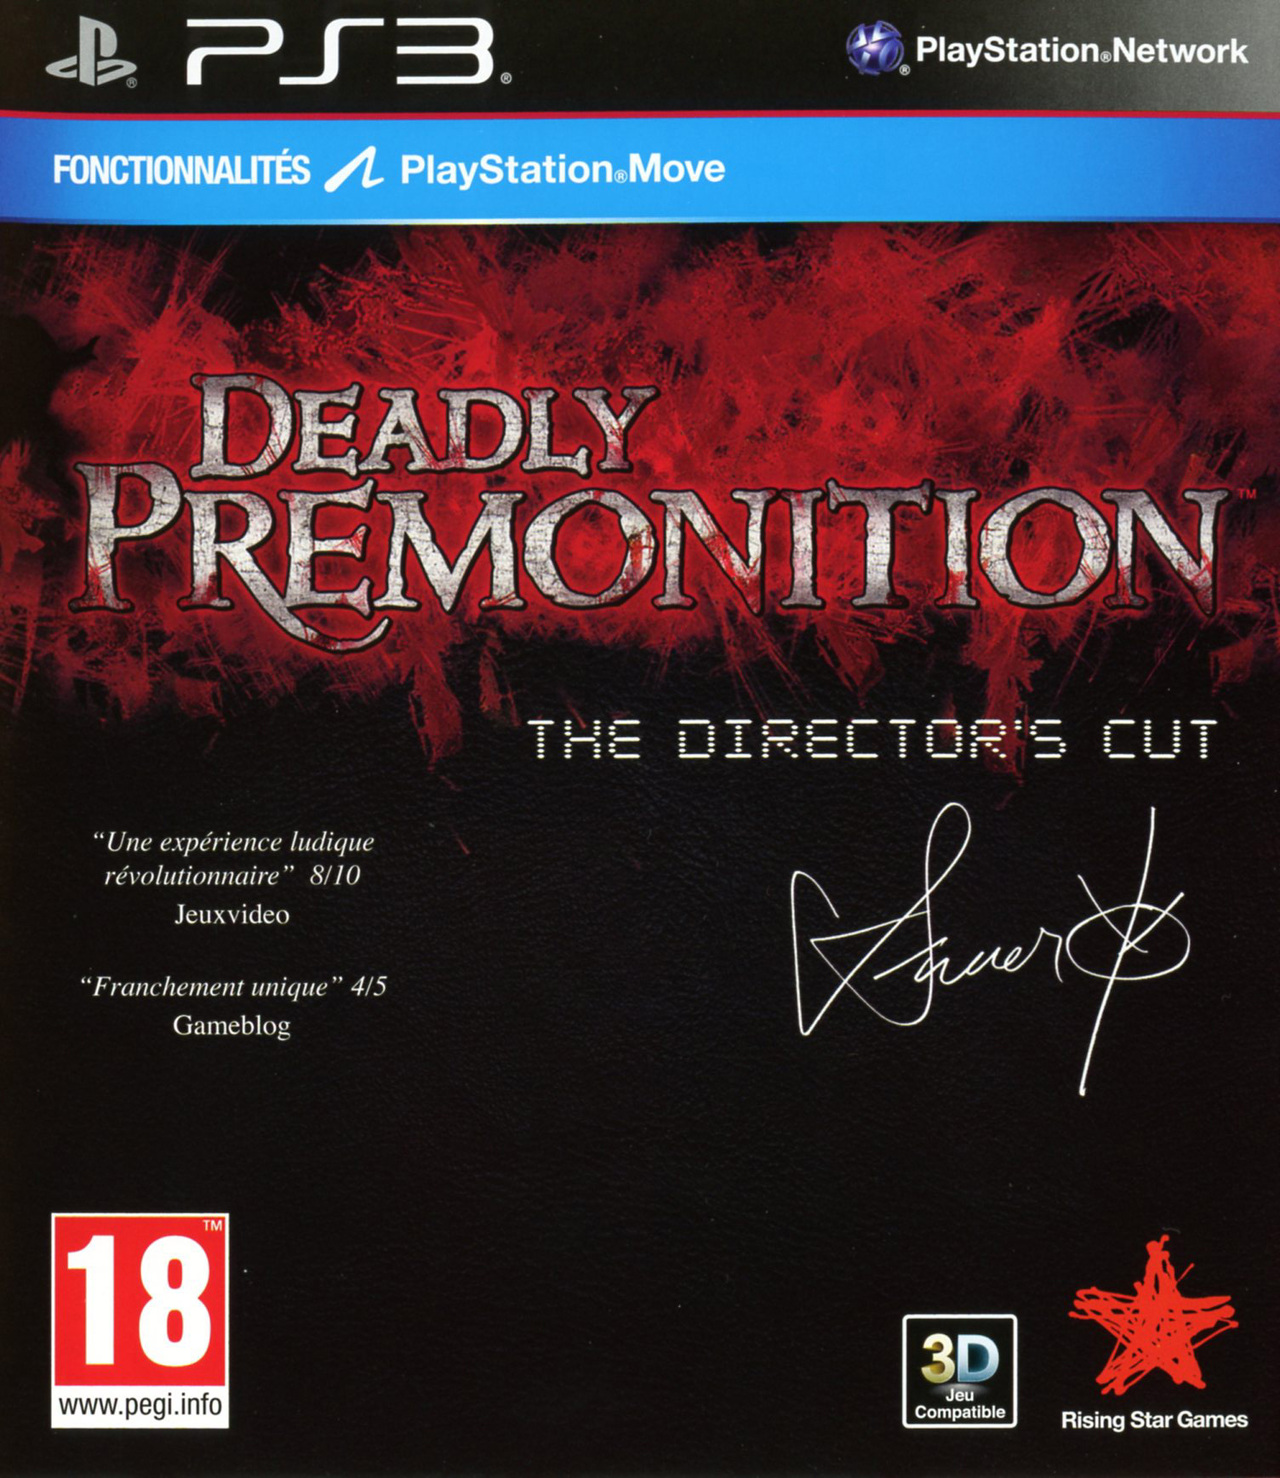 jaquette-deadly-premonition-the-director-s-cut-playstation-3-ps3-cover-avant-g-1367239729.jpg